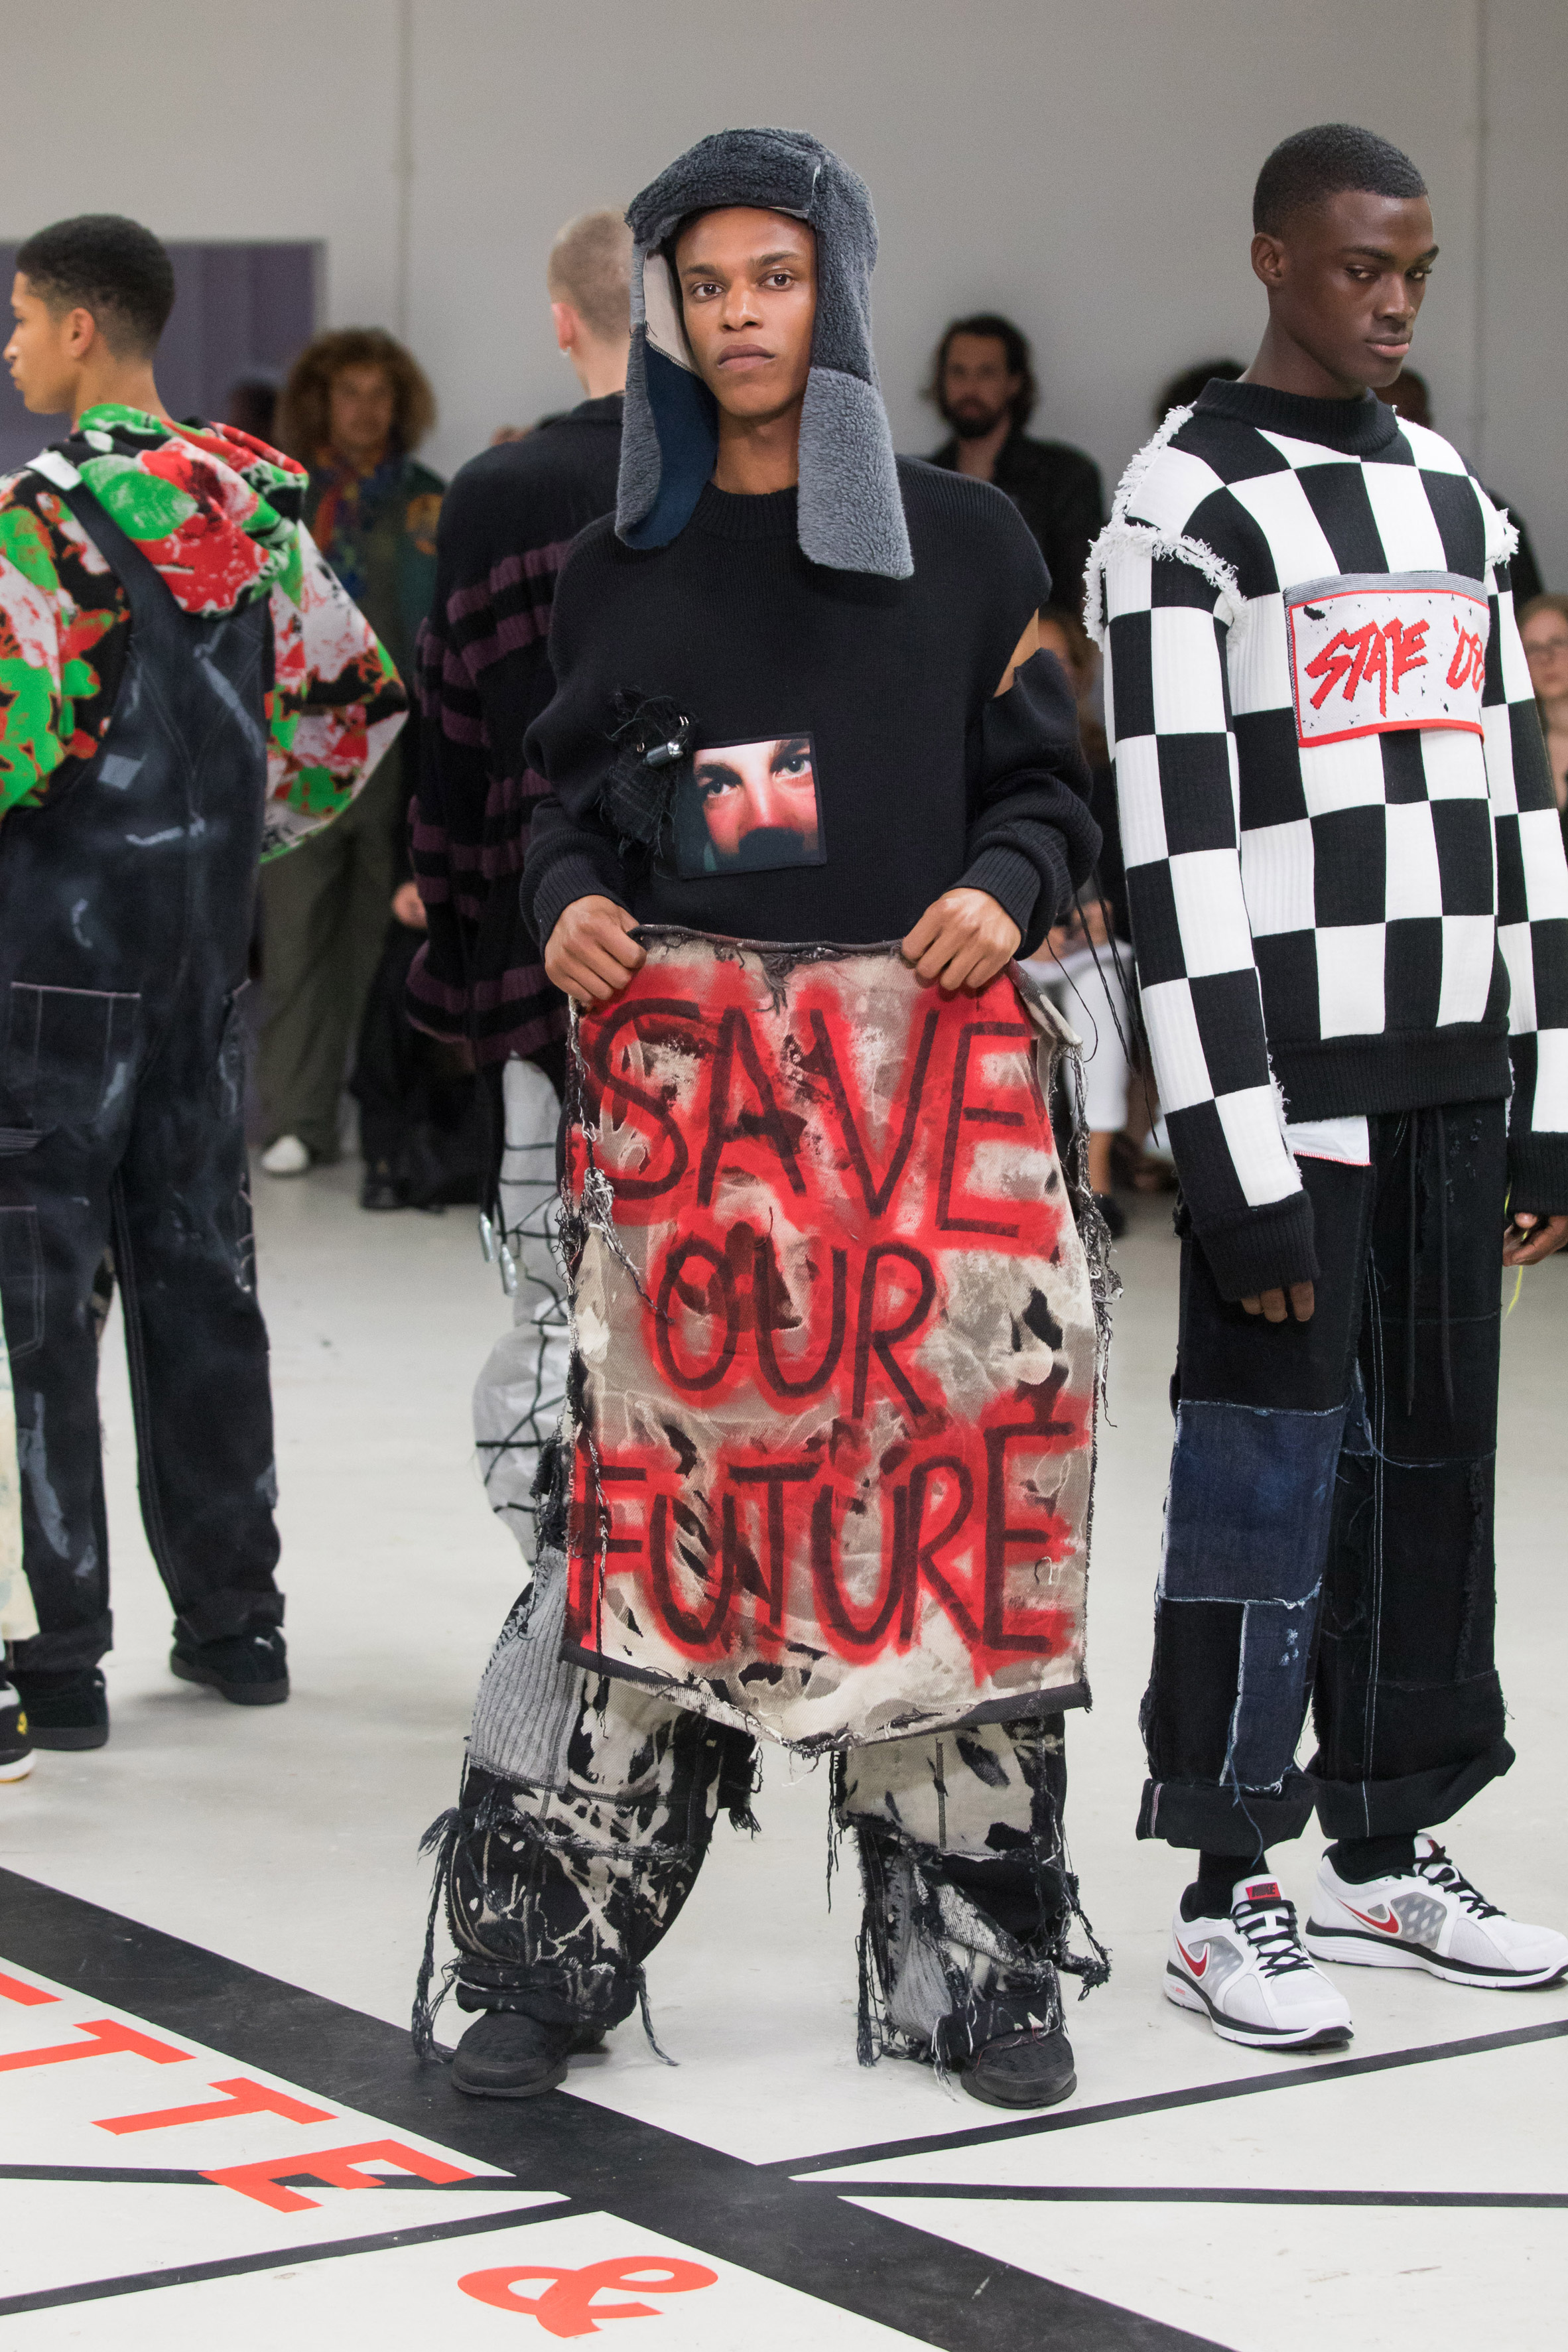 15 highlights from this year's Royal College of Art MA Fashion show